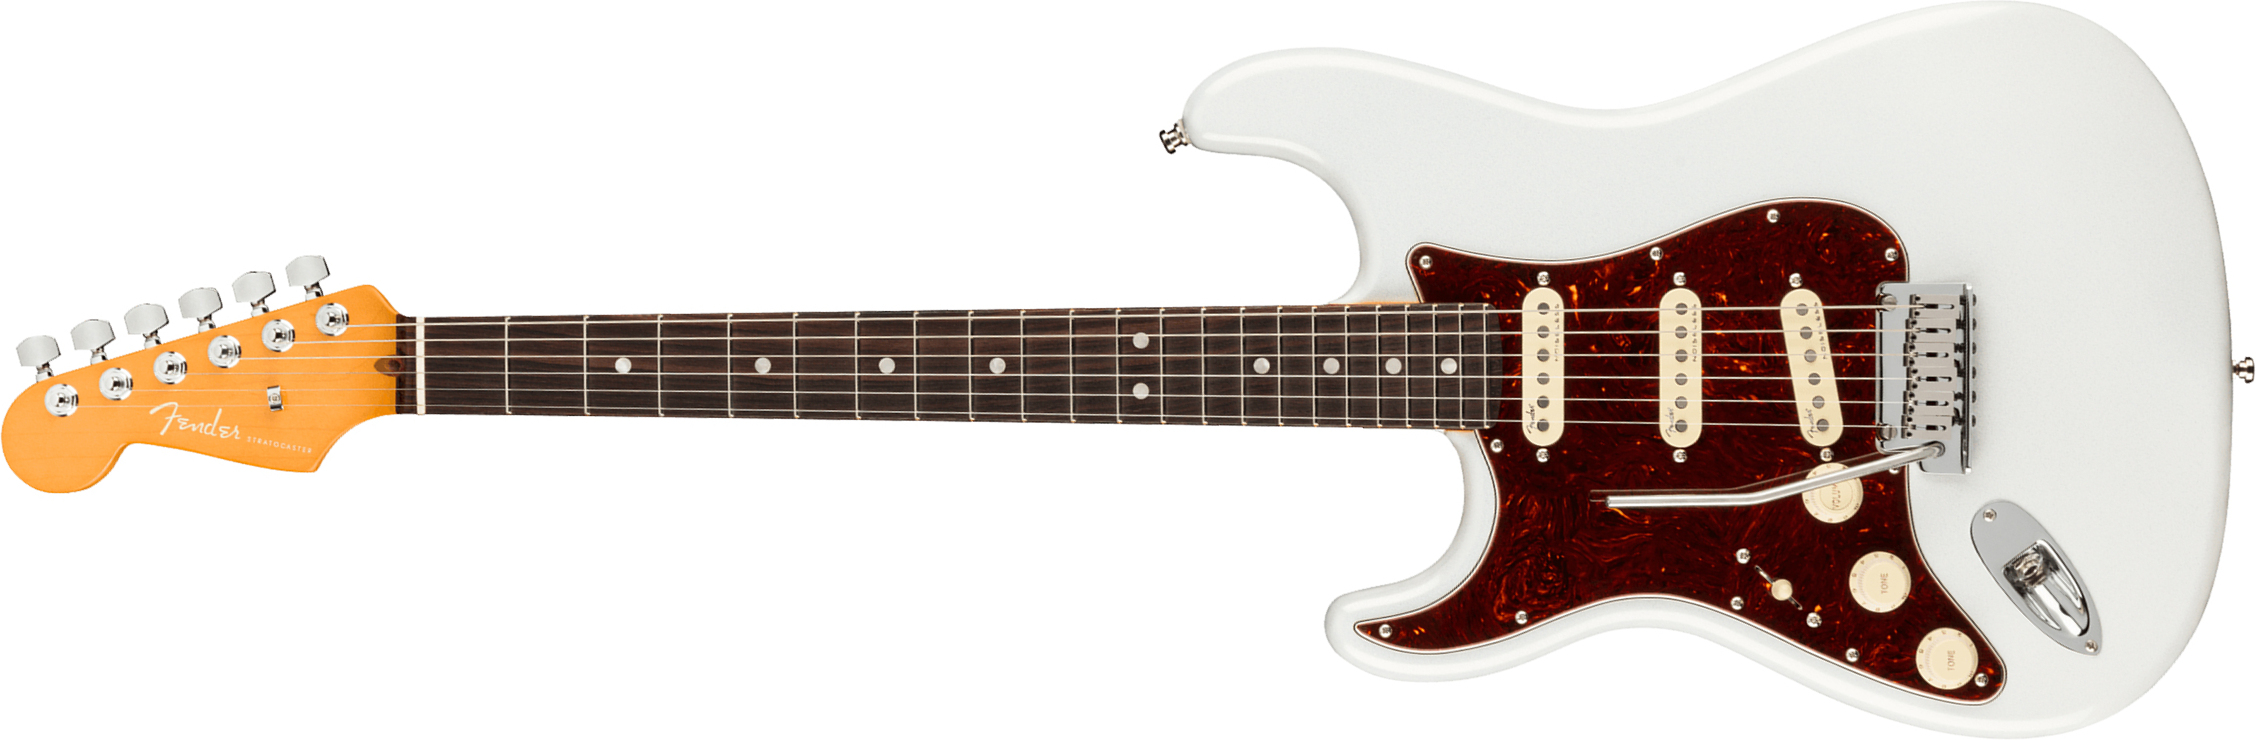 Fender Strat American Ultra Lh Gaucher Usa Rw +etui - Arctic Pearl - Left-handed electric guitar - Main picture